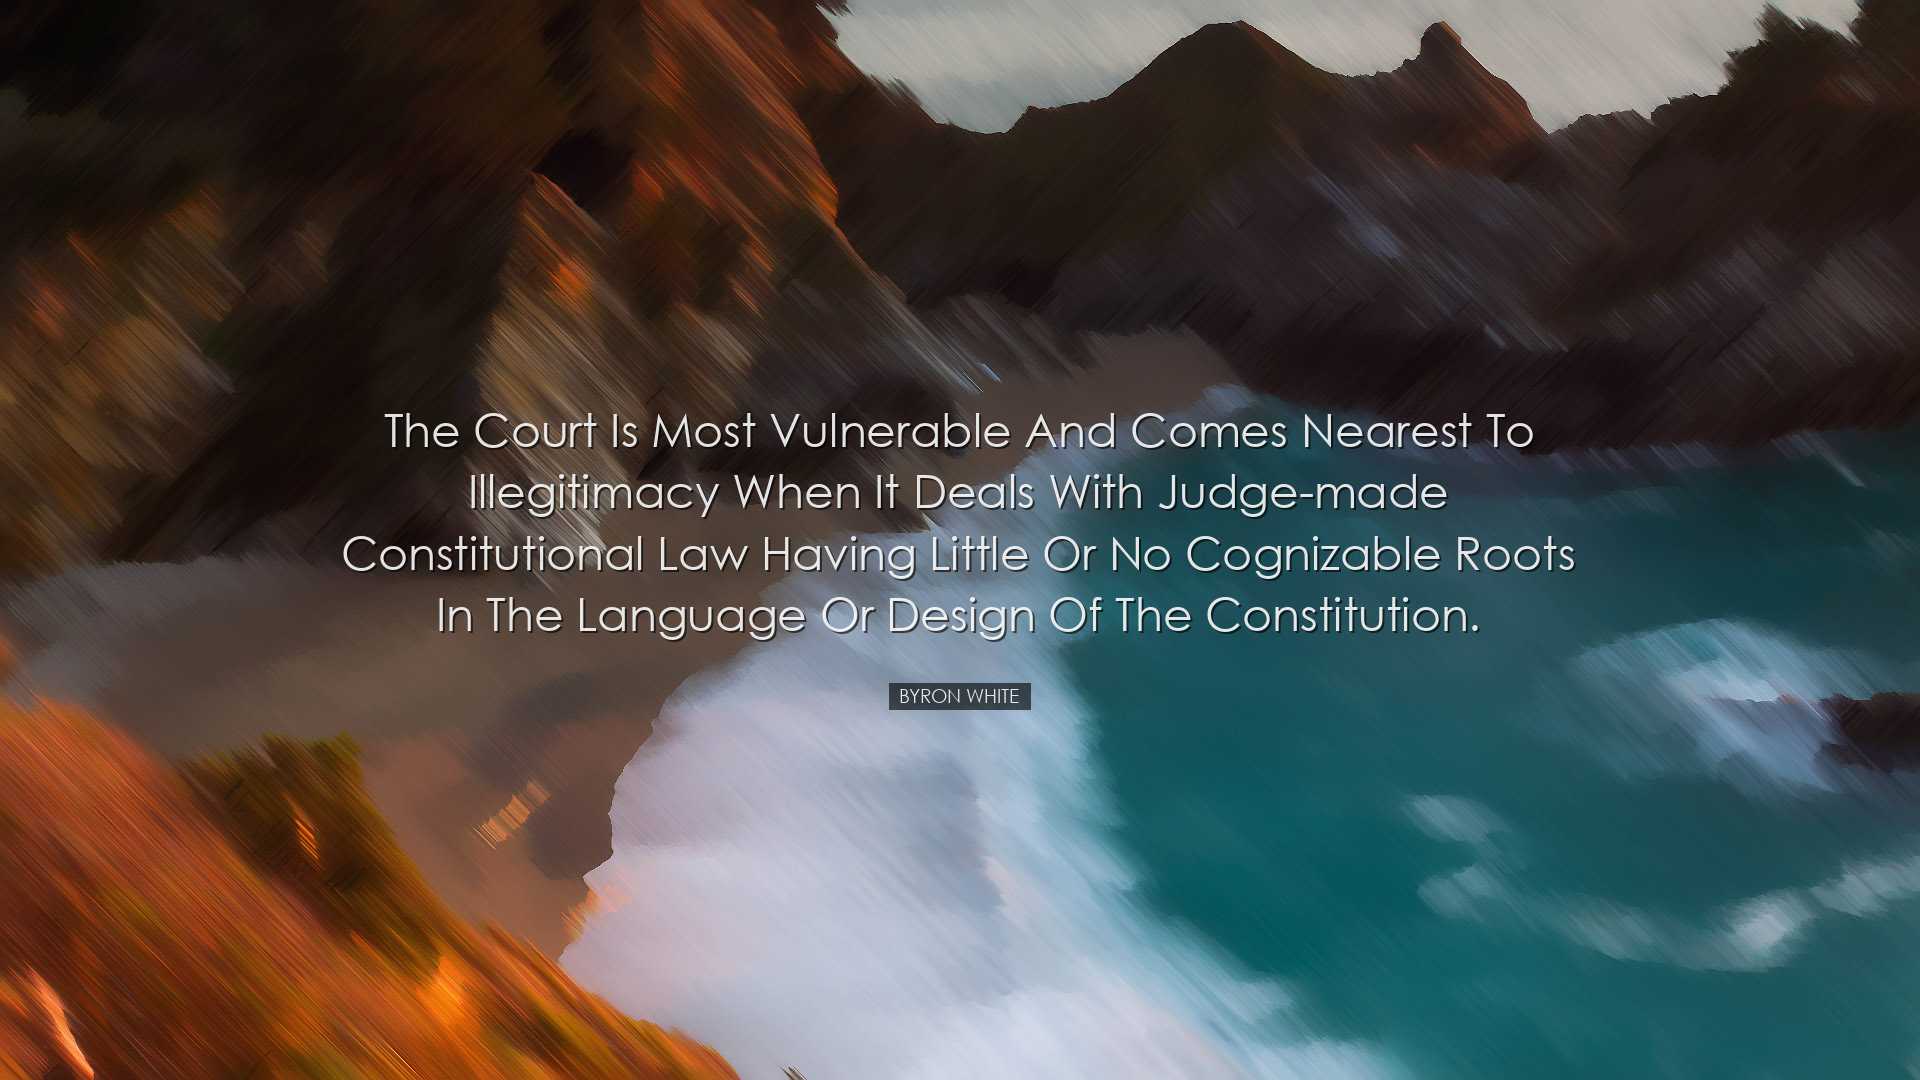 The Court is most vulnerable and comes nearest to illegitimacy whe